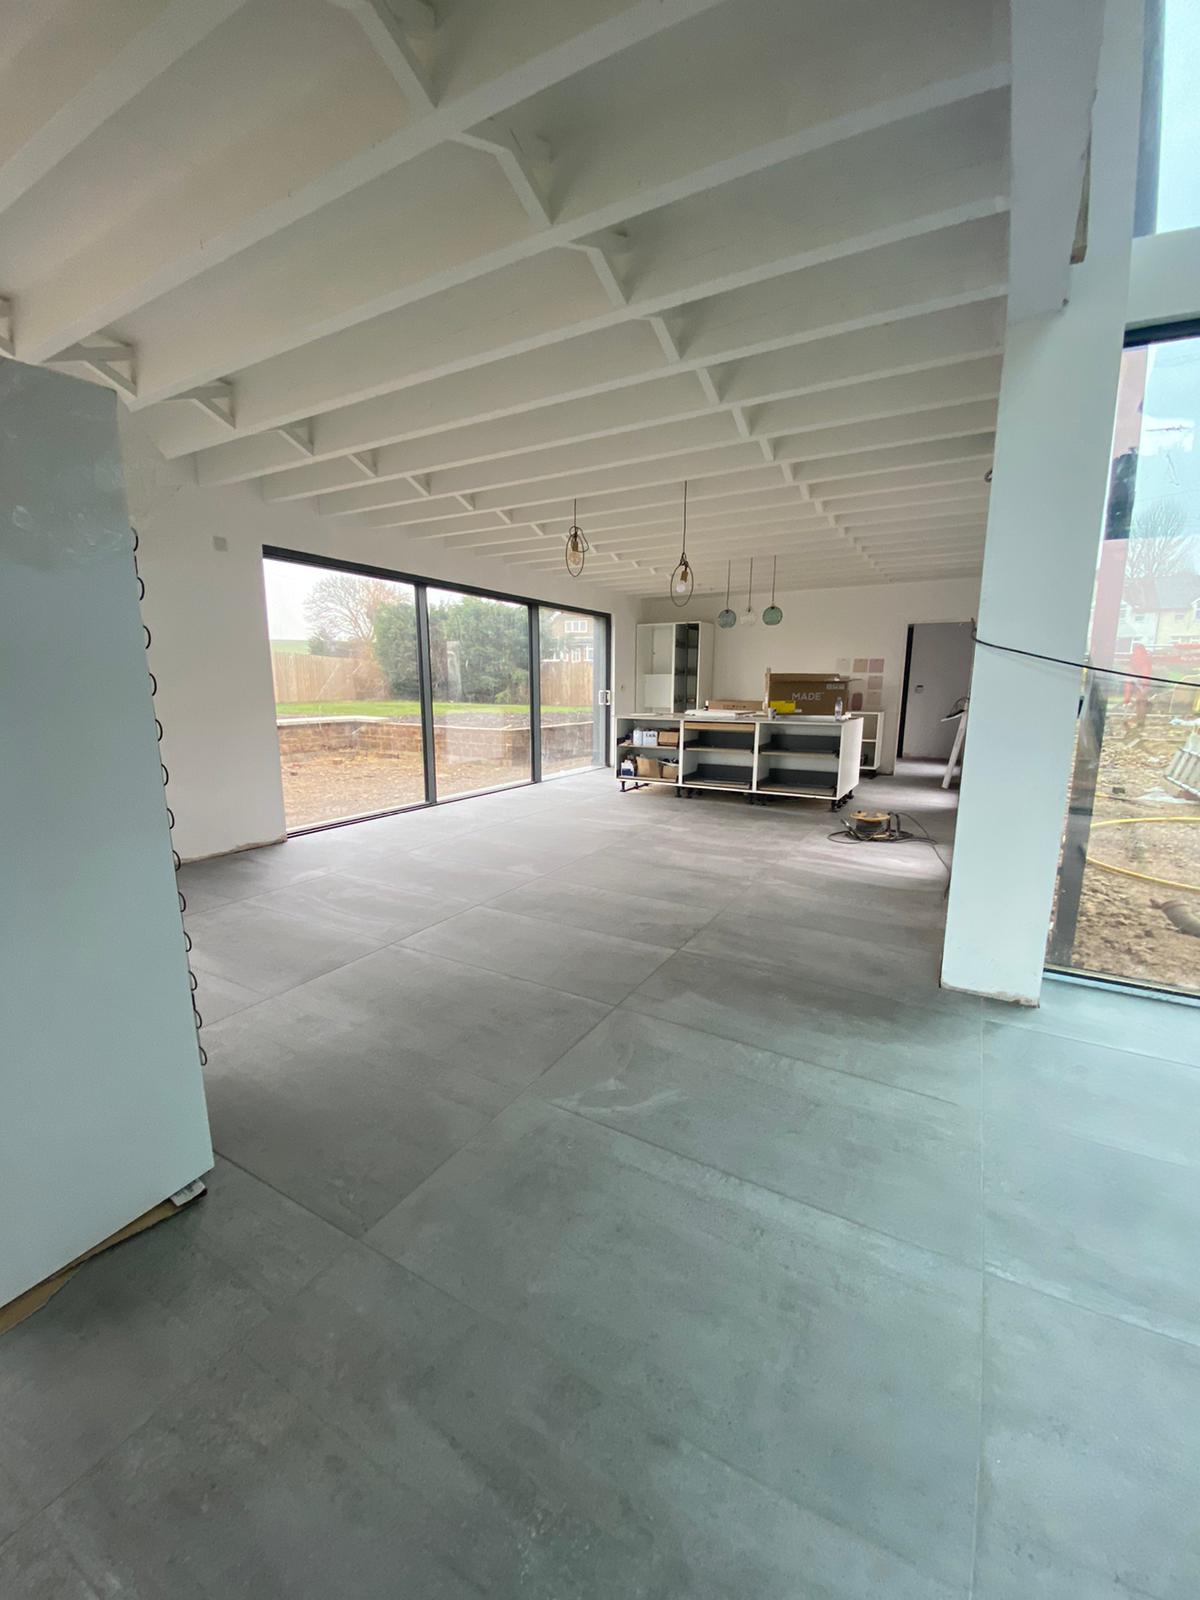 concrete floor tiles used in a new build home